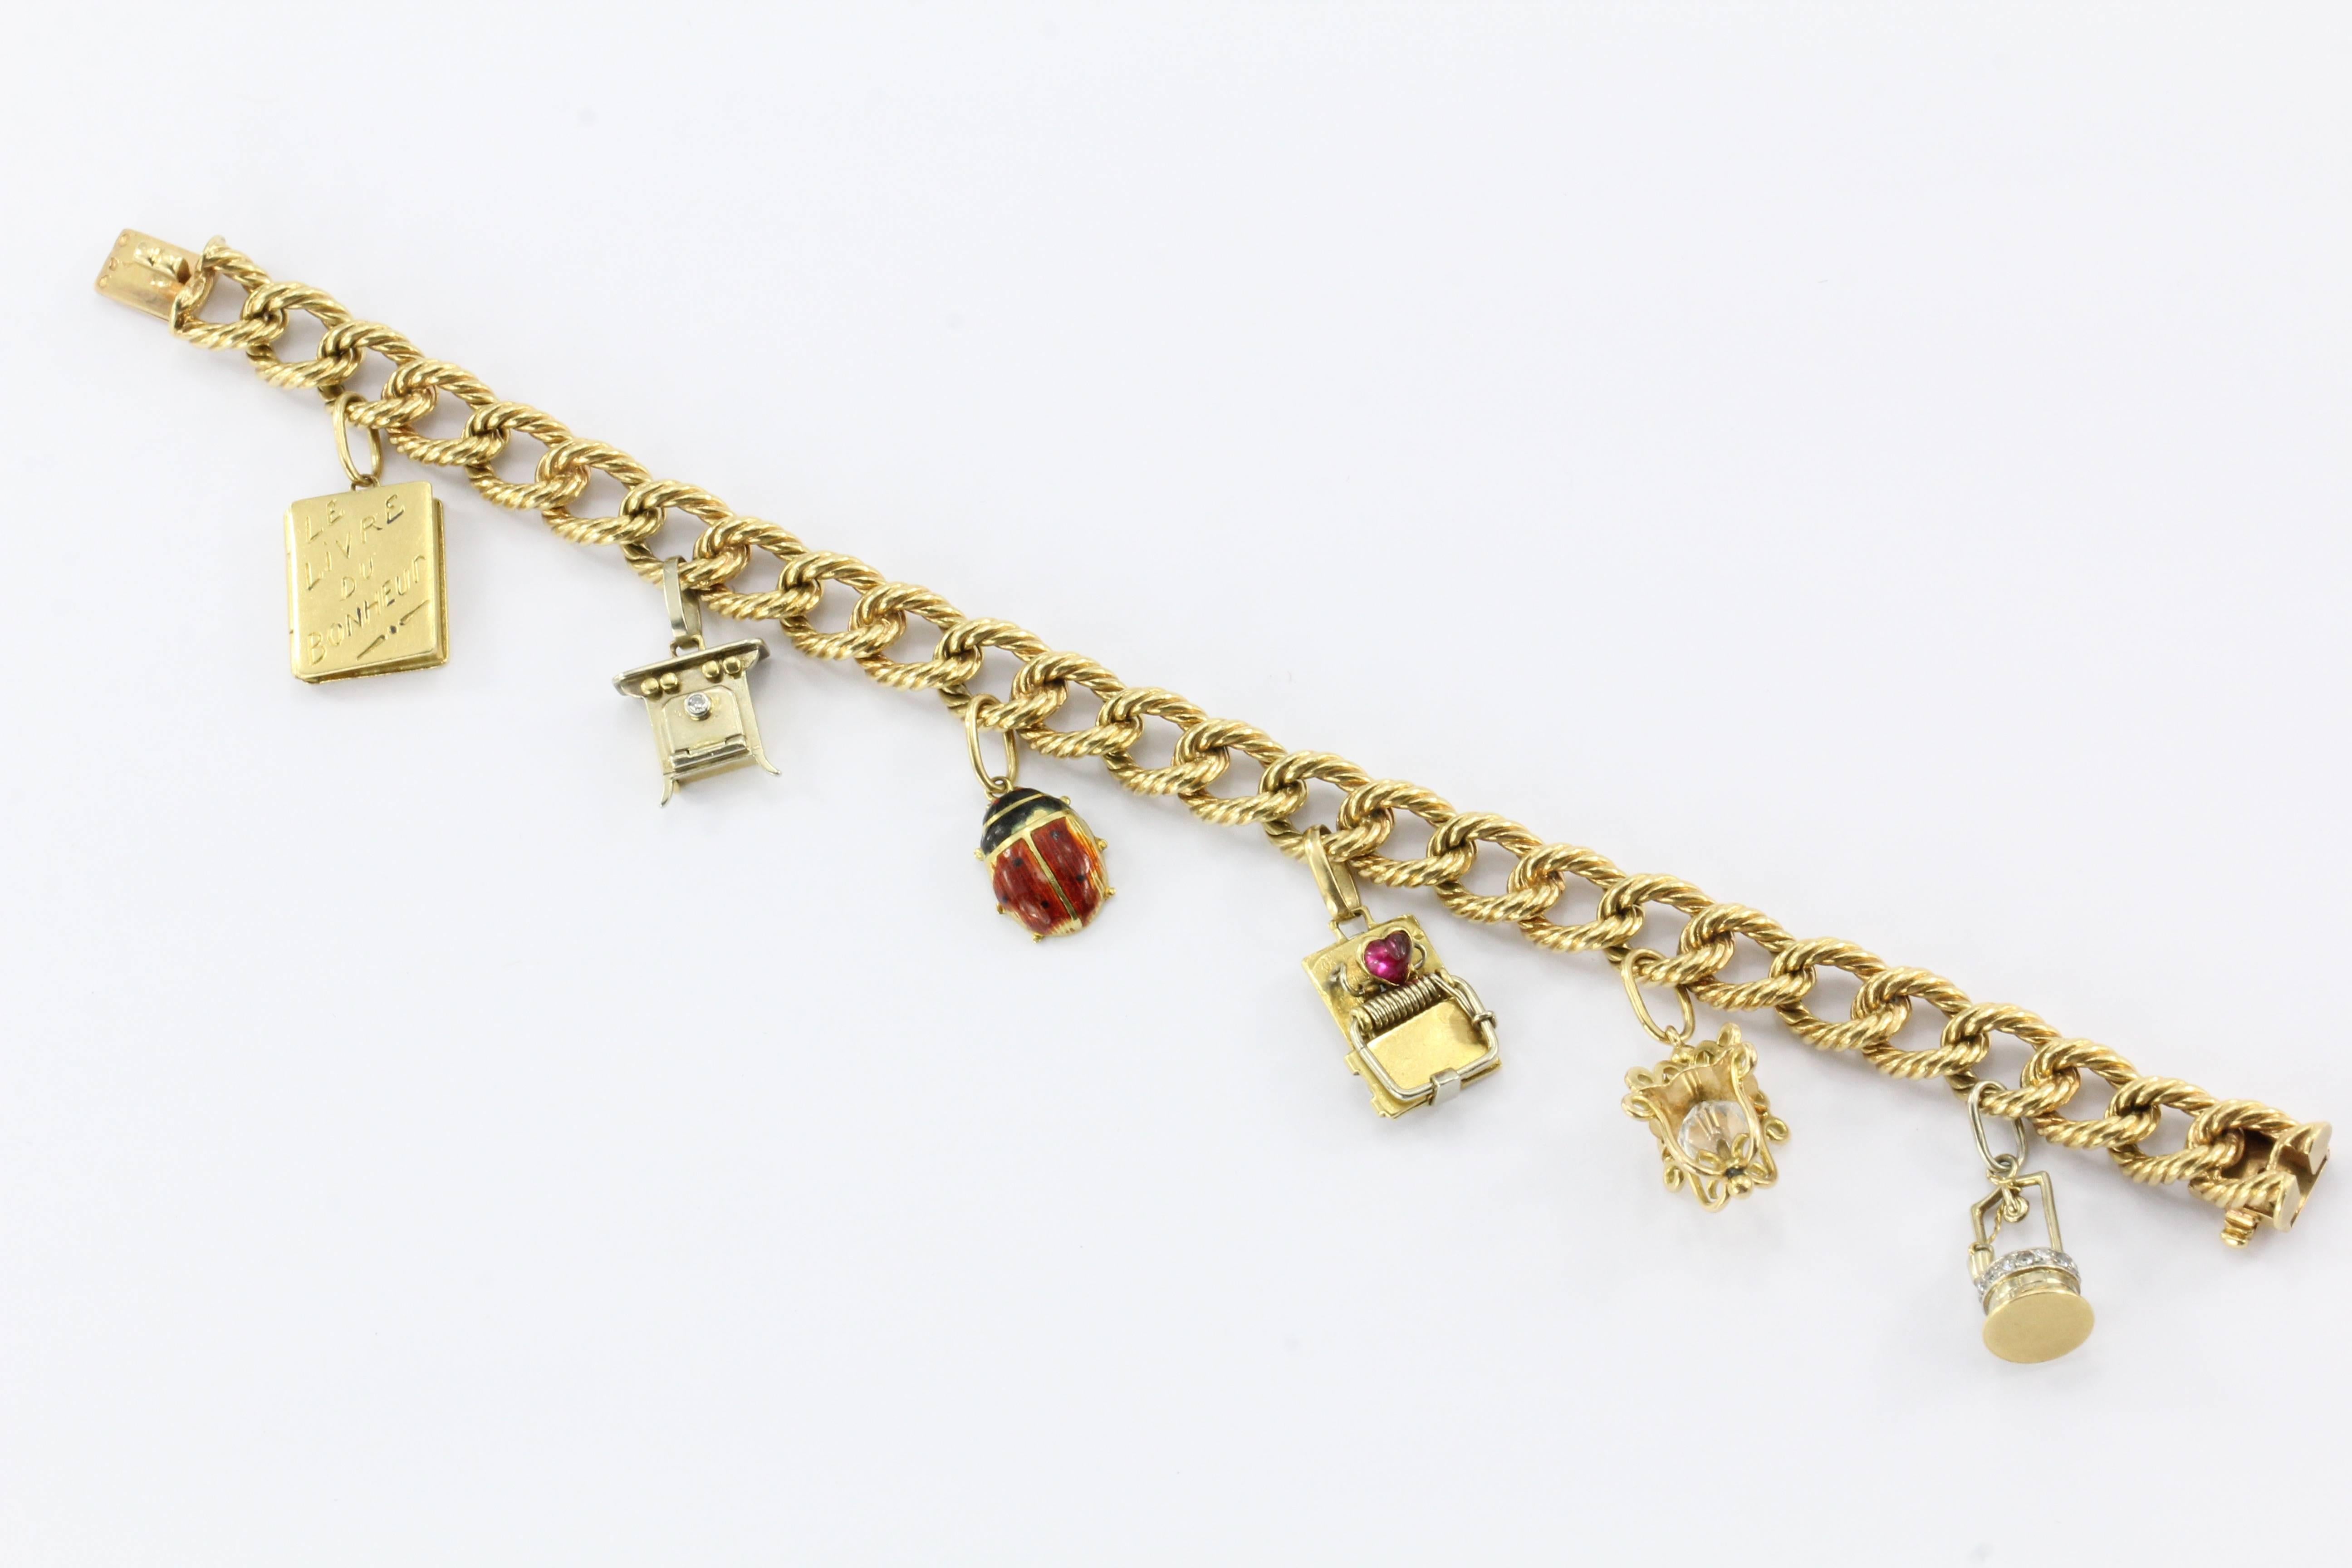 Cartier 18K Gold French Retro Loaded Charm Bracelet c.1950's

This charming Cartier bracelet comes complete with 6 gold charms. It is signed Cartier as well as the French Eagle head marks for 18K gold and a blurred French mark. The piece measures